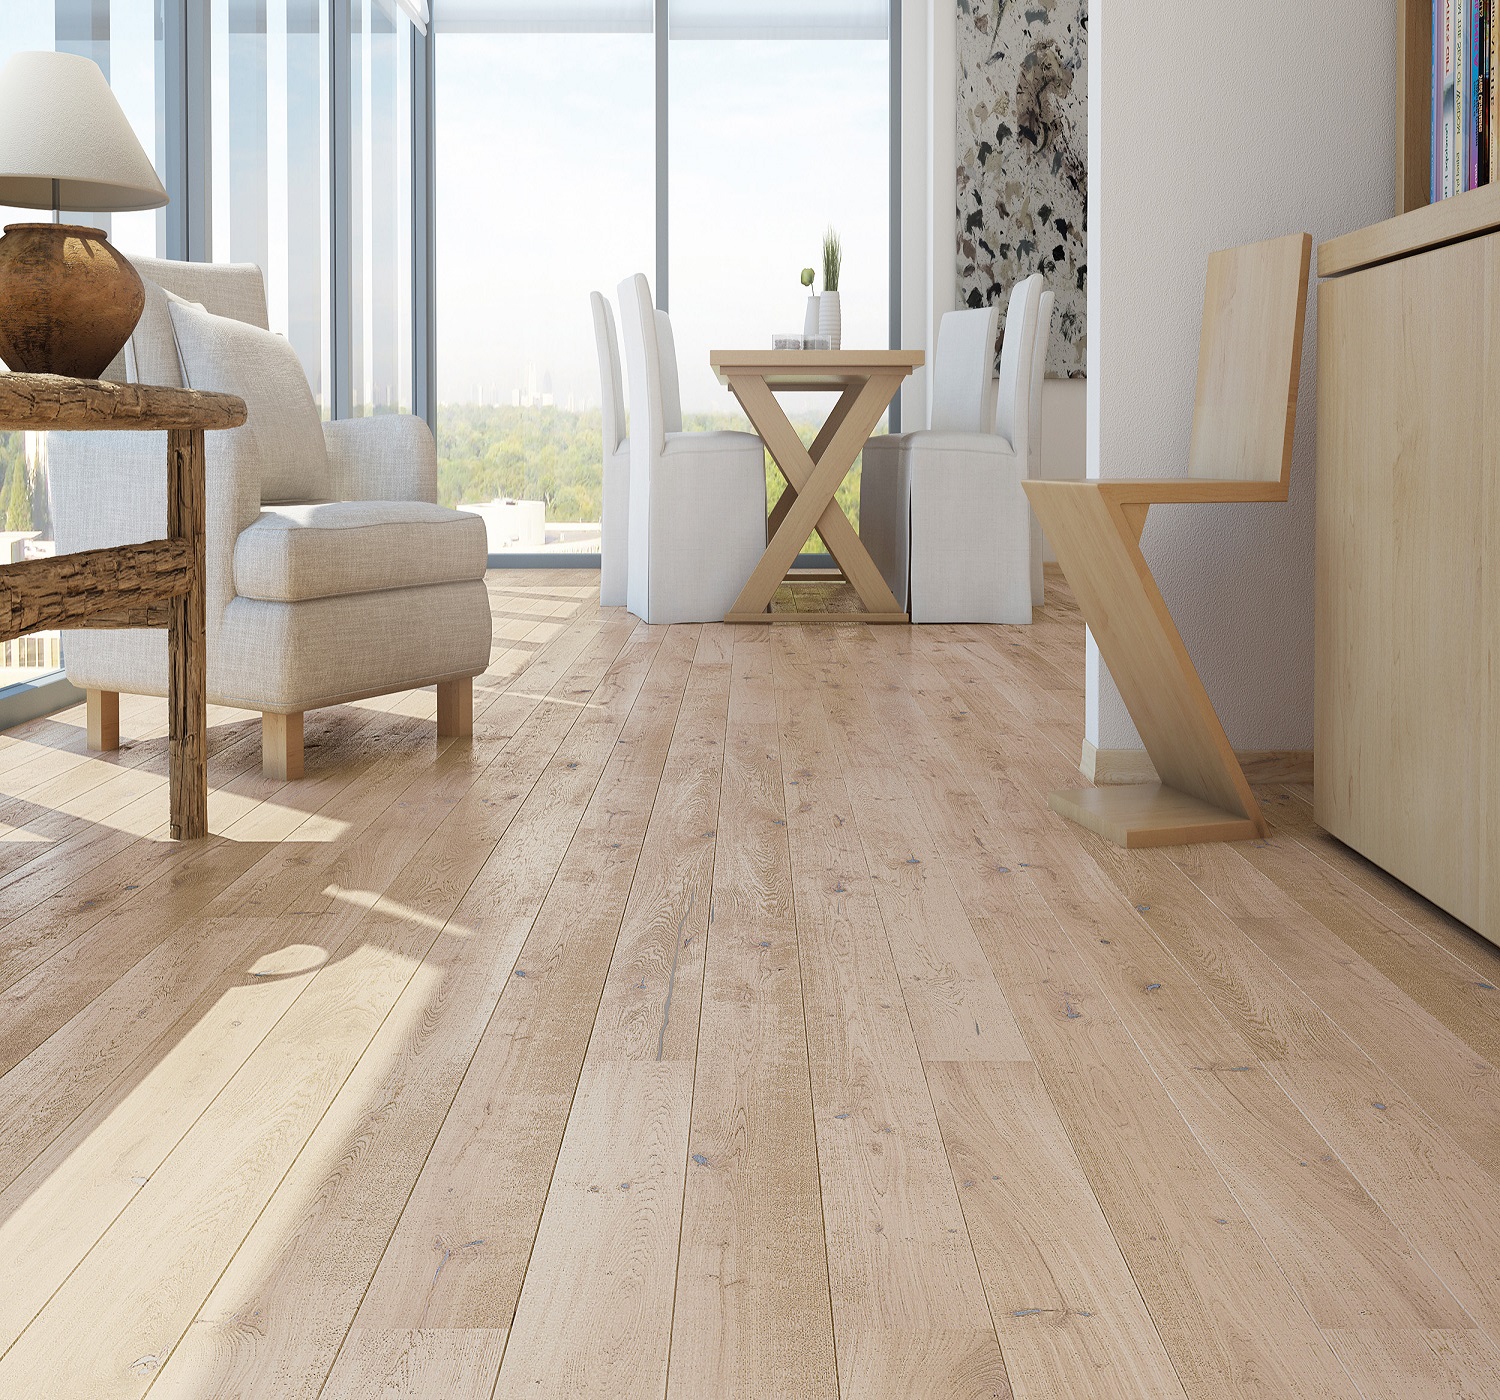 Why Floor Sanding is Important for Your Home